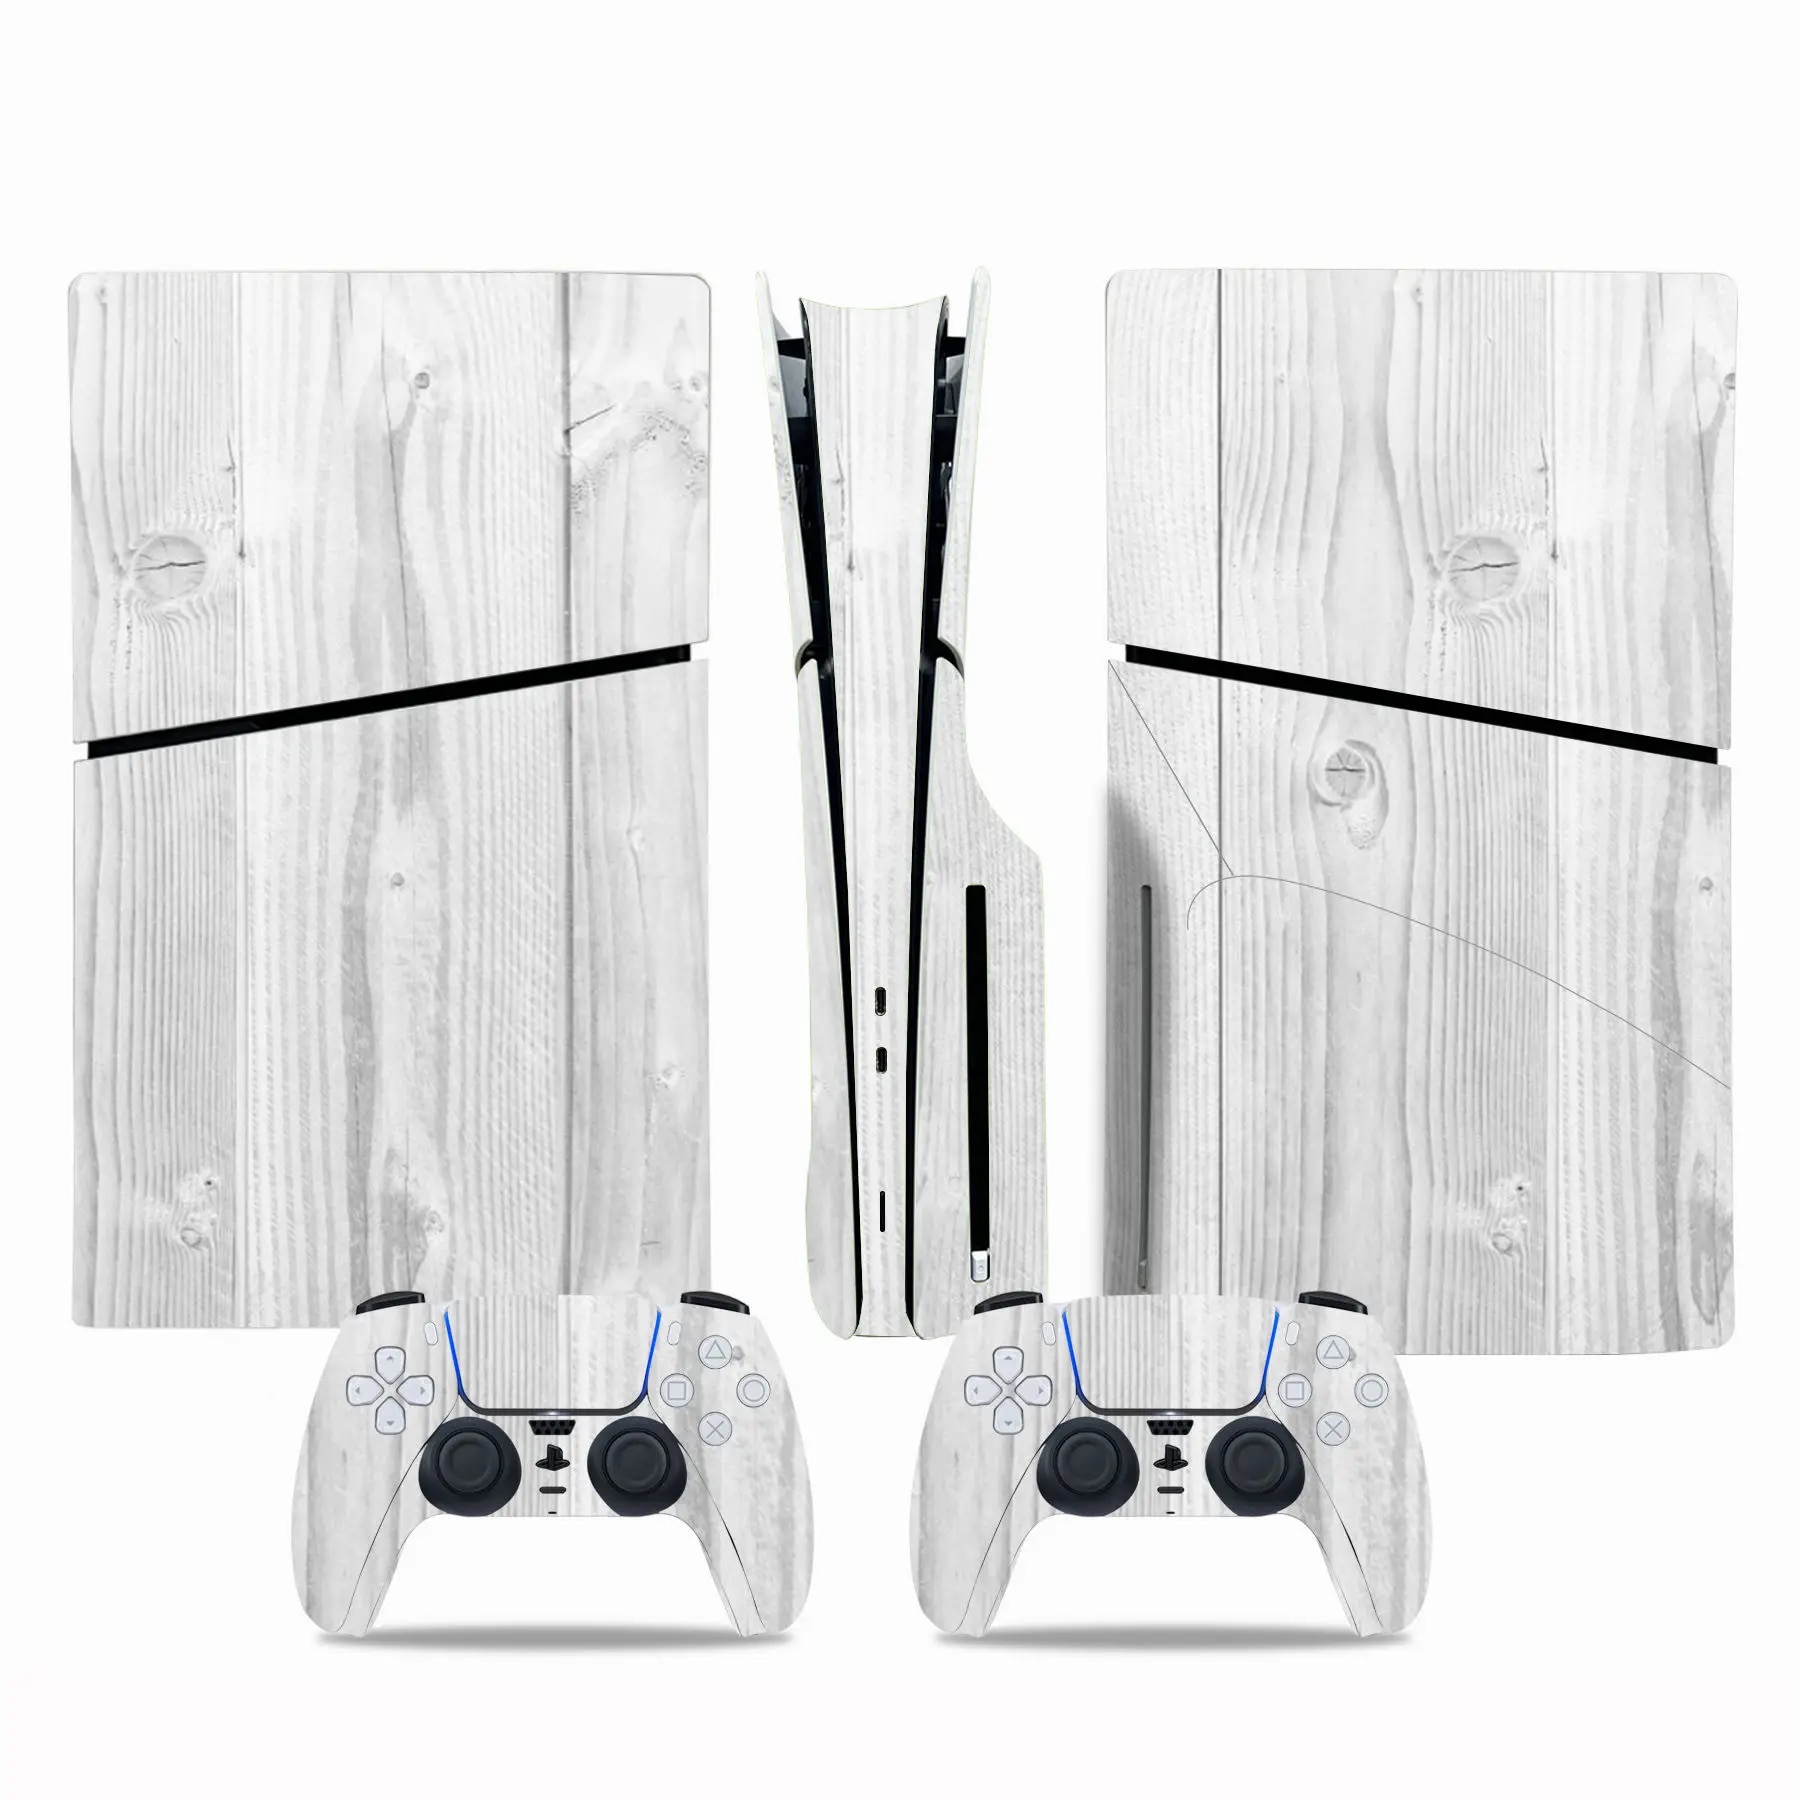 【No-profit】 Gamegenixx Ps5 Disc Skin Sticker Wood Grain Protective Vinyl Decal Full Set For Ps5 Disc Console And 2 Controllers